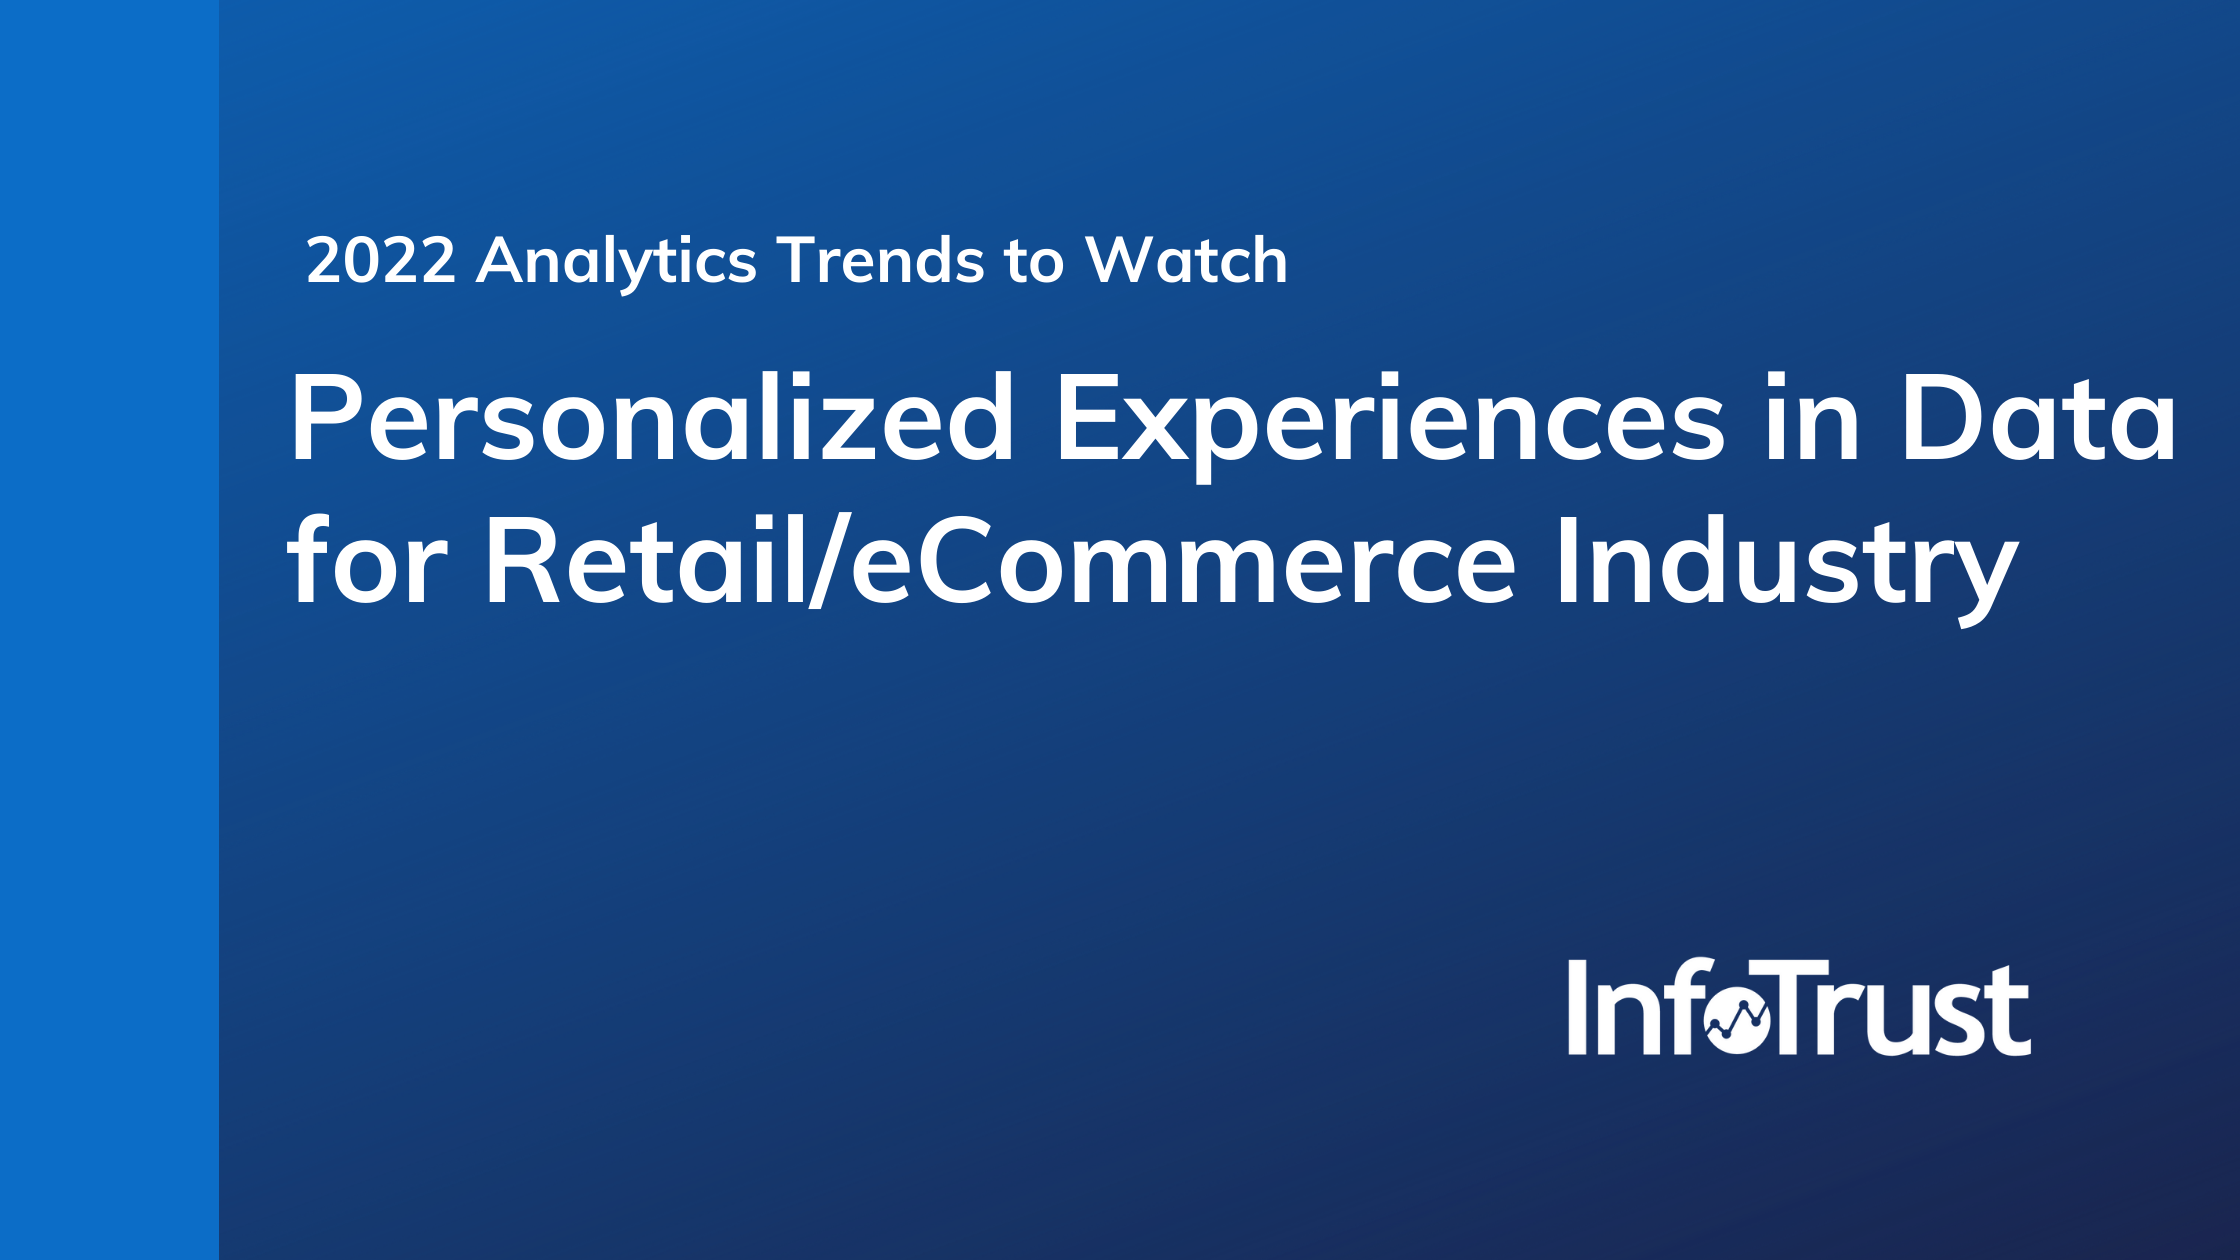 2022 Analytics Trends to Watch: Personalized Experiences in Data for Retail/eCommerce Industry